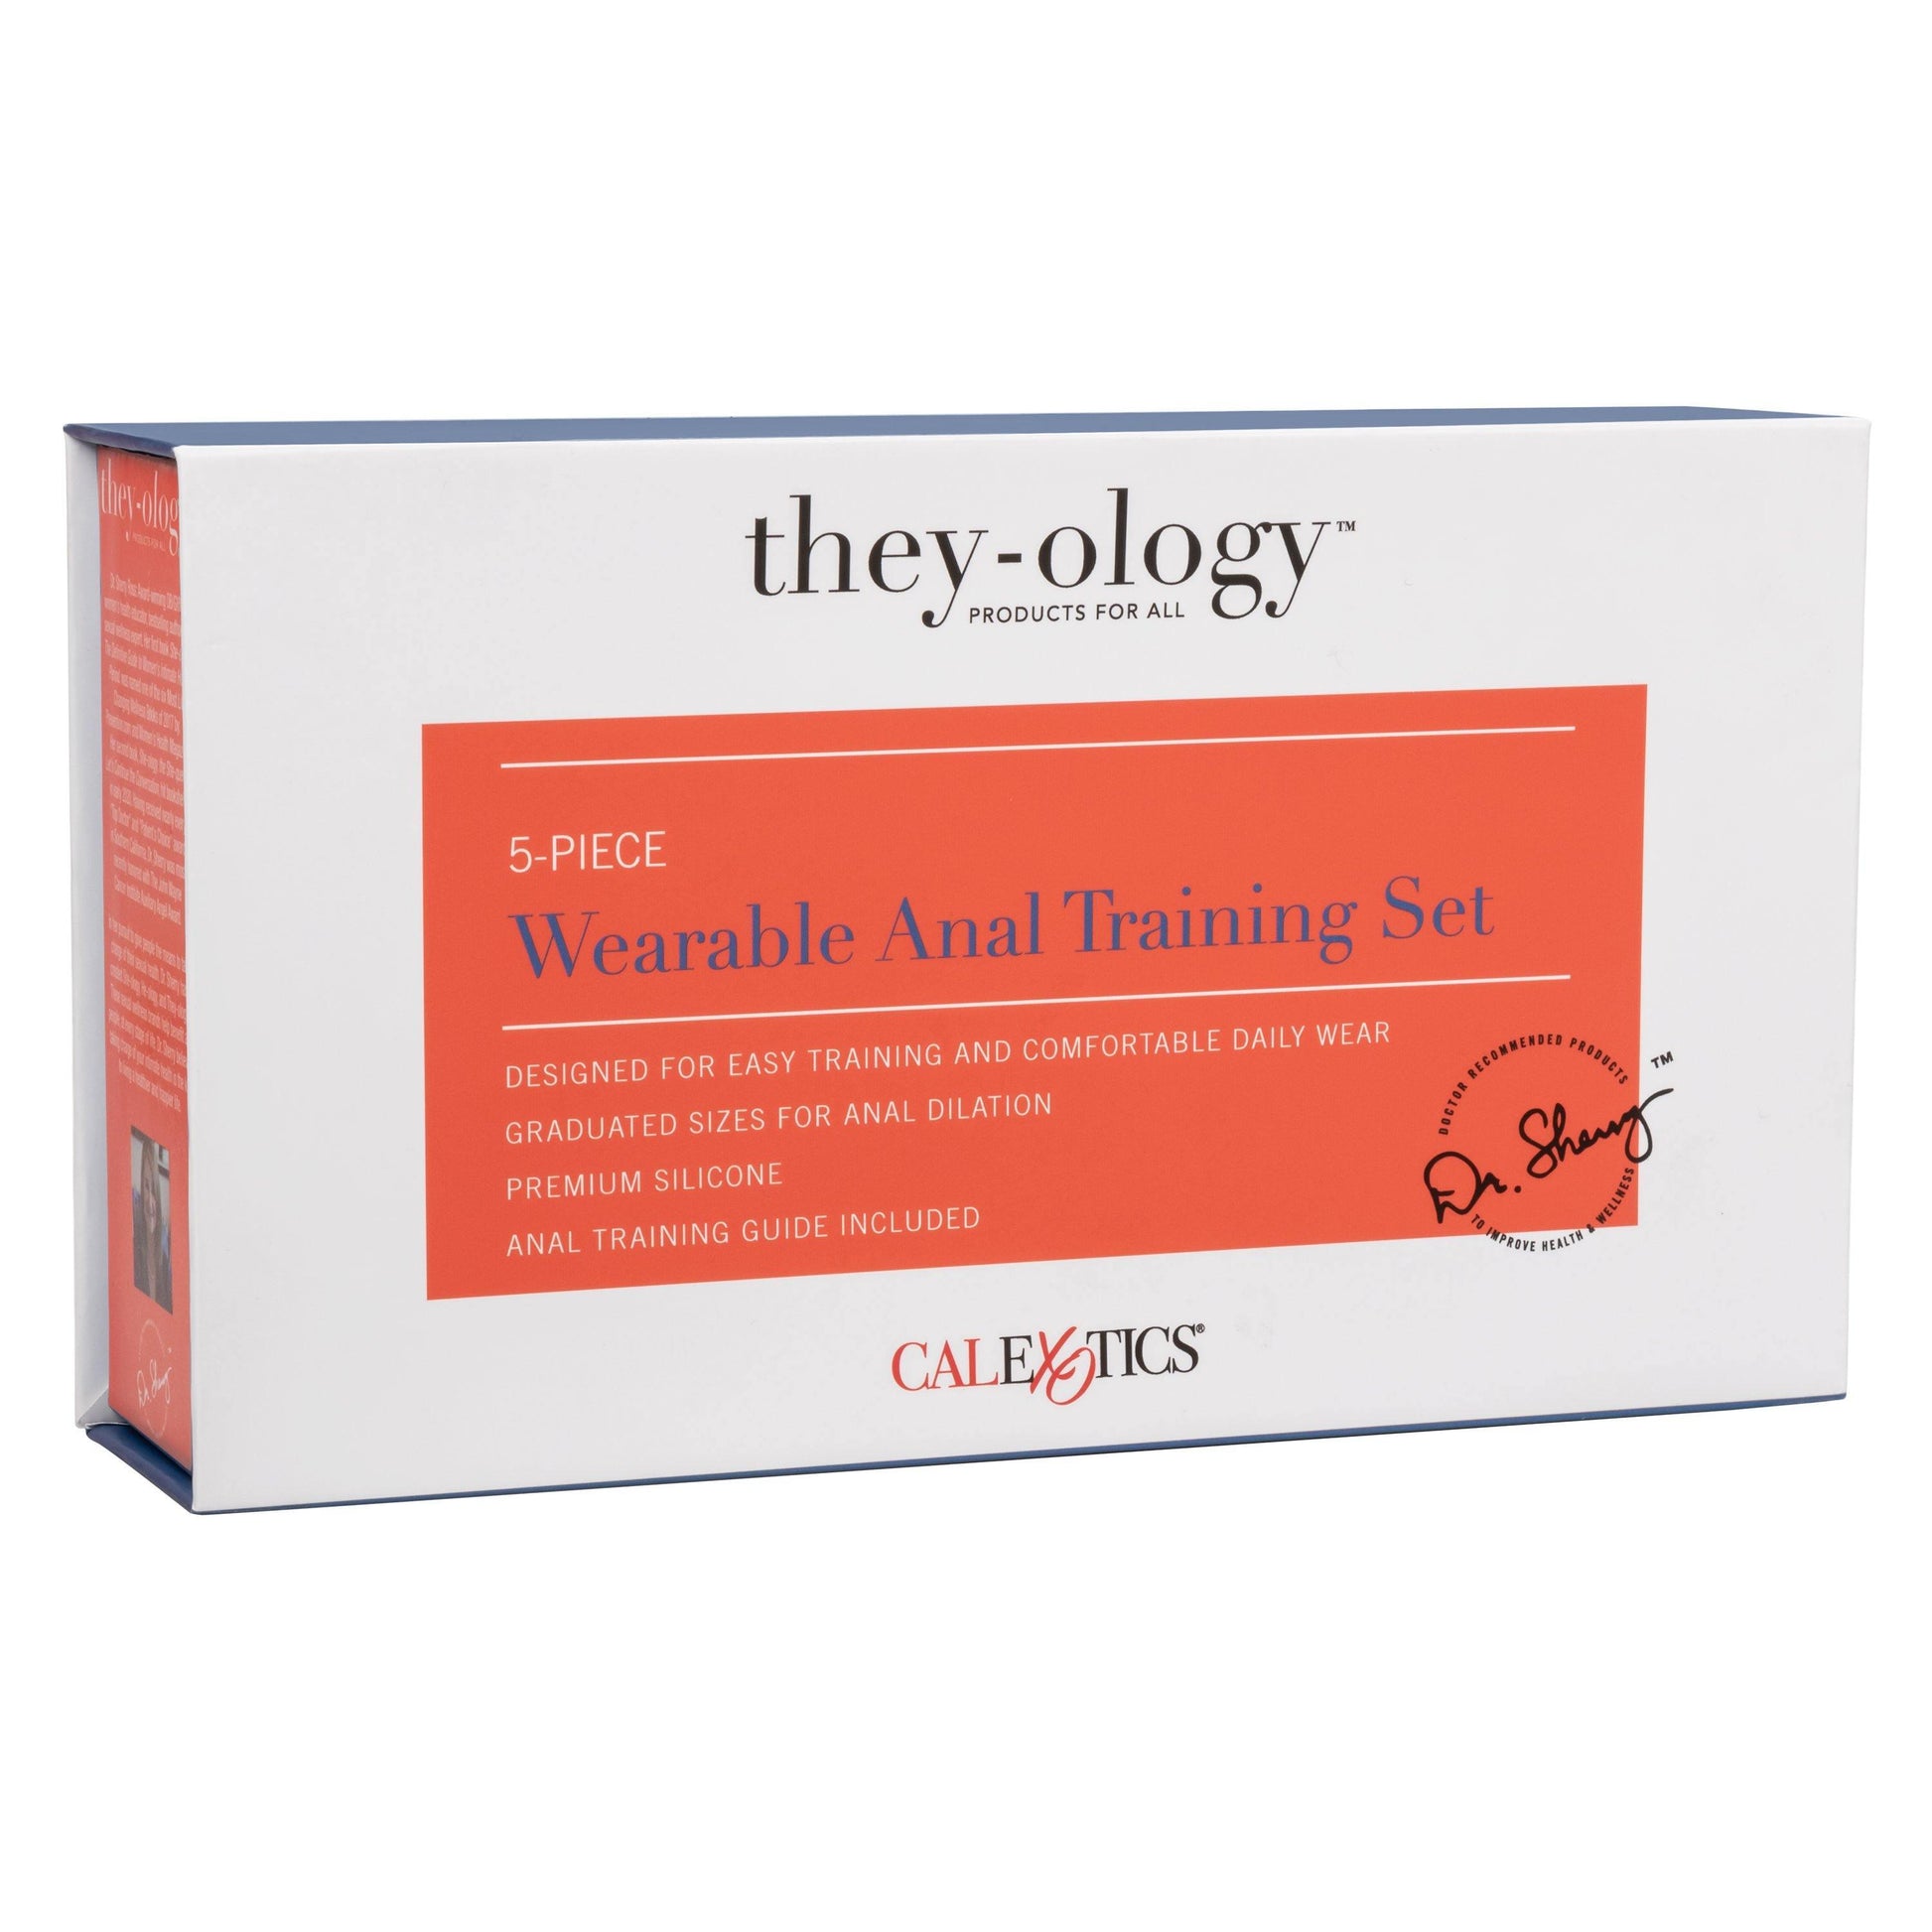 They-Ology 5-Piece Wearable Anal Training Set - My Sex Toy Hub